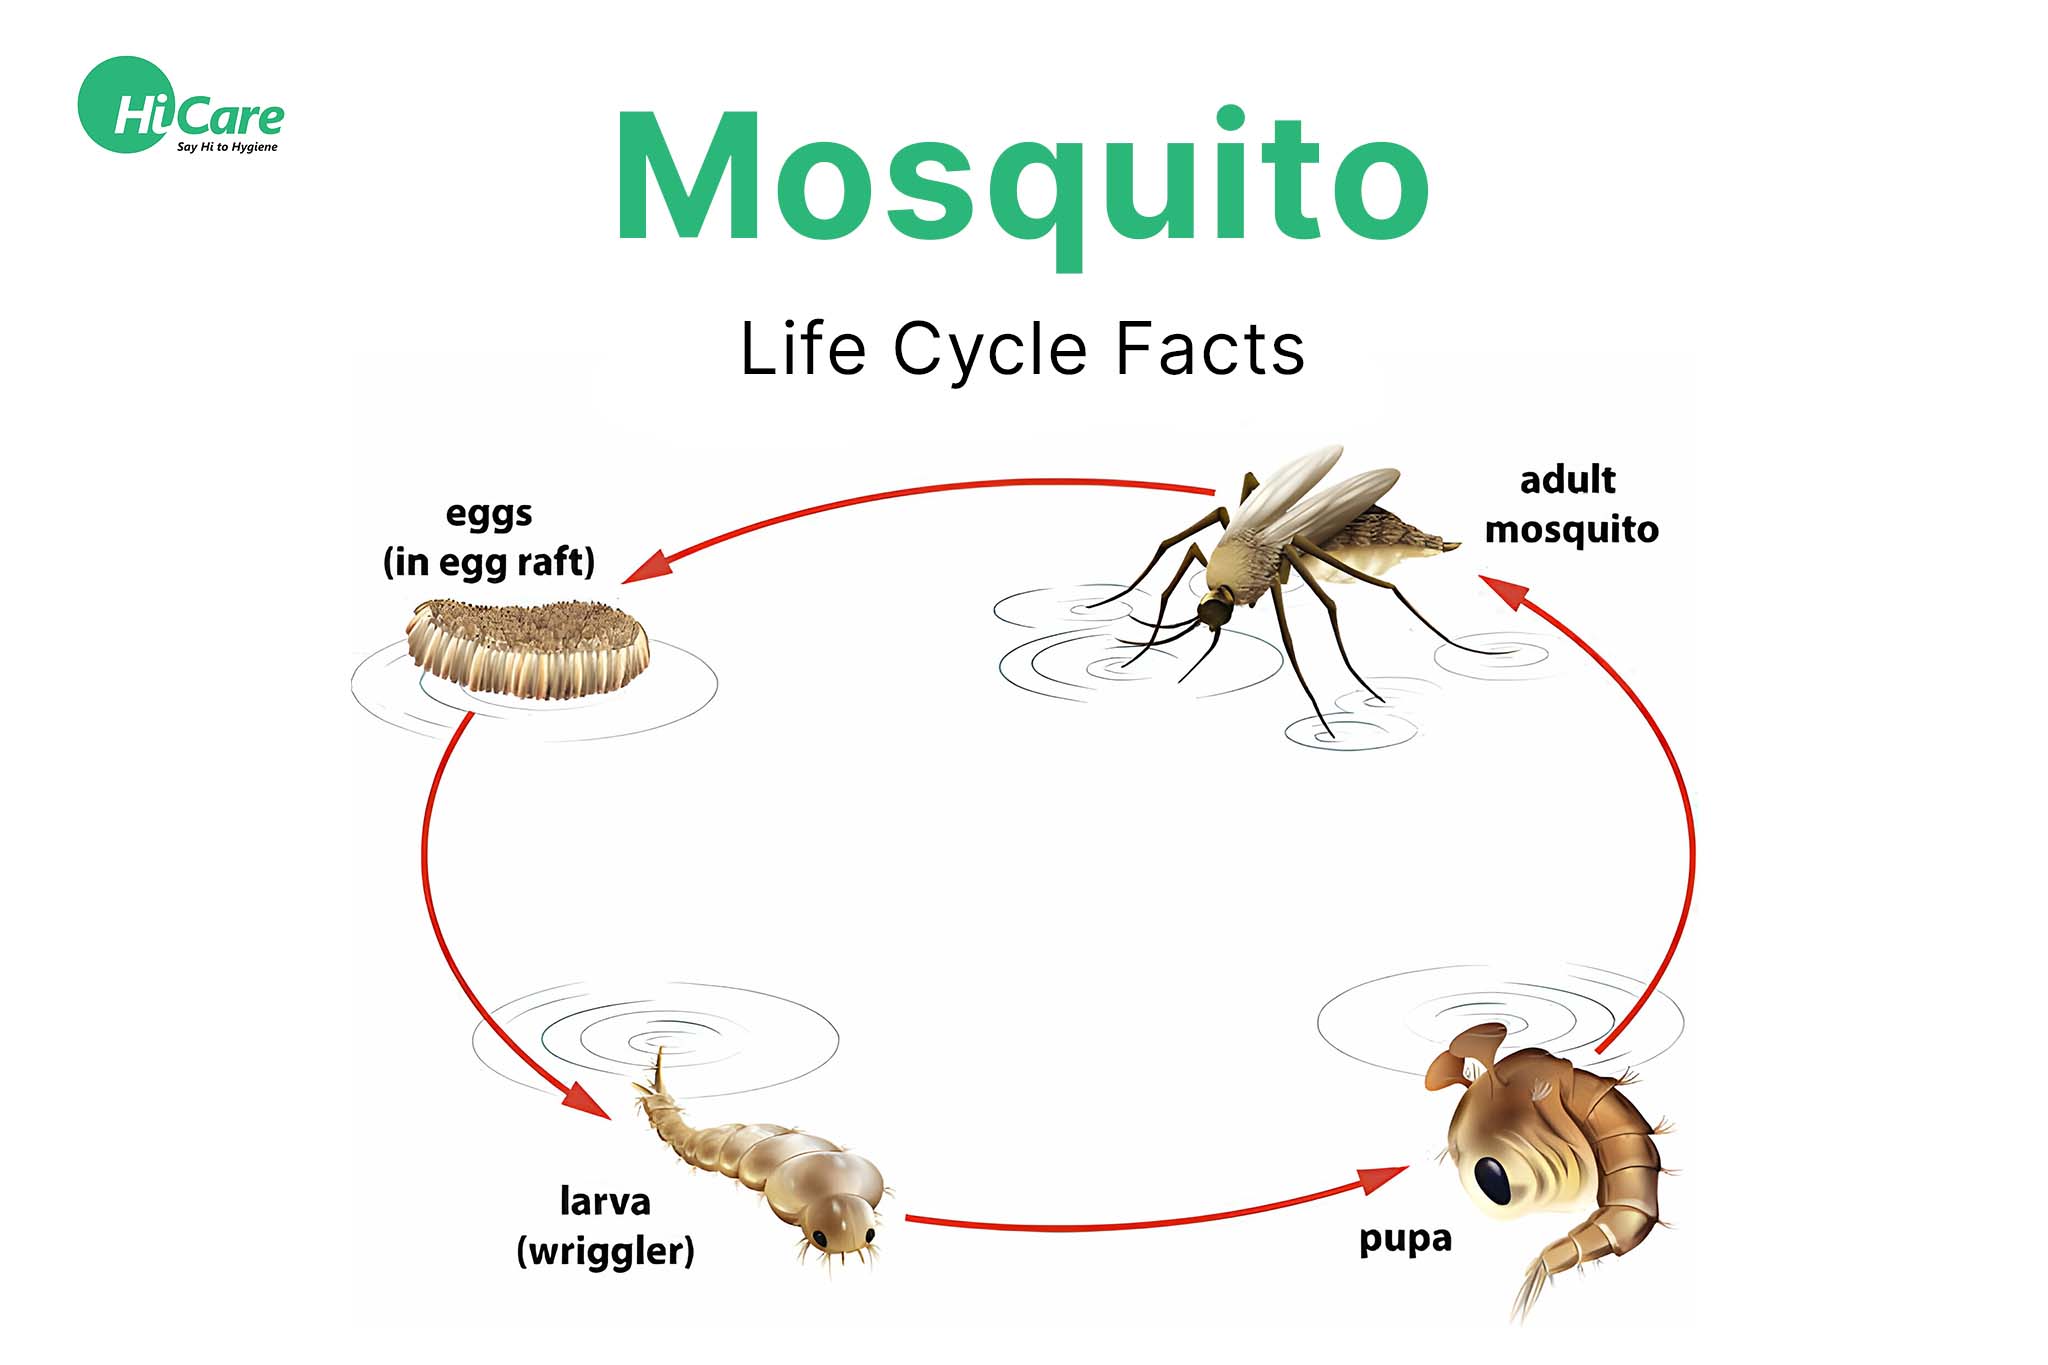 Mosquito Life Cycle Facts